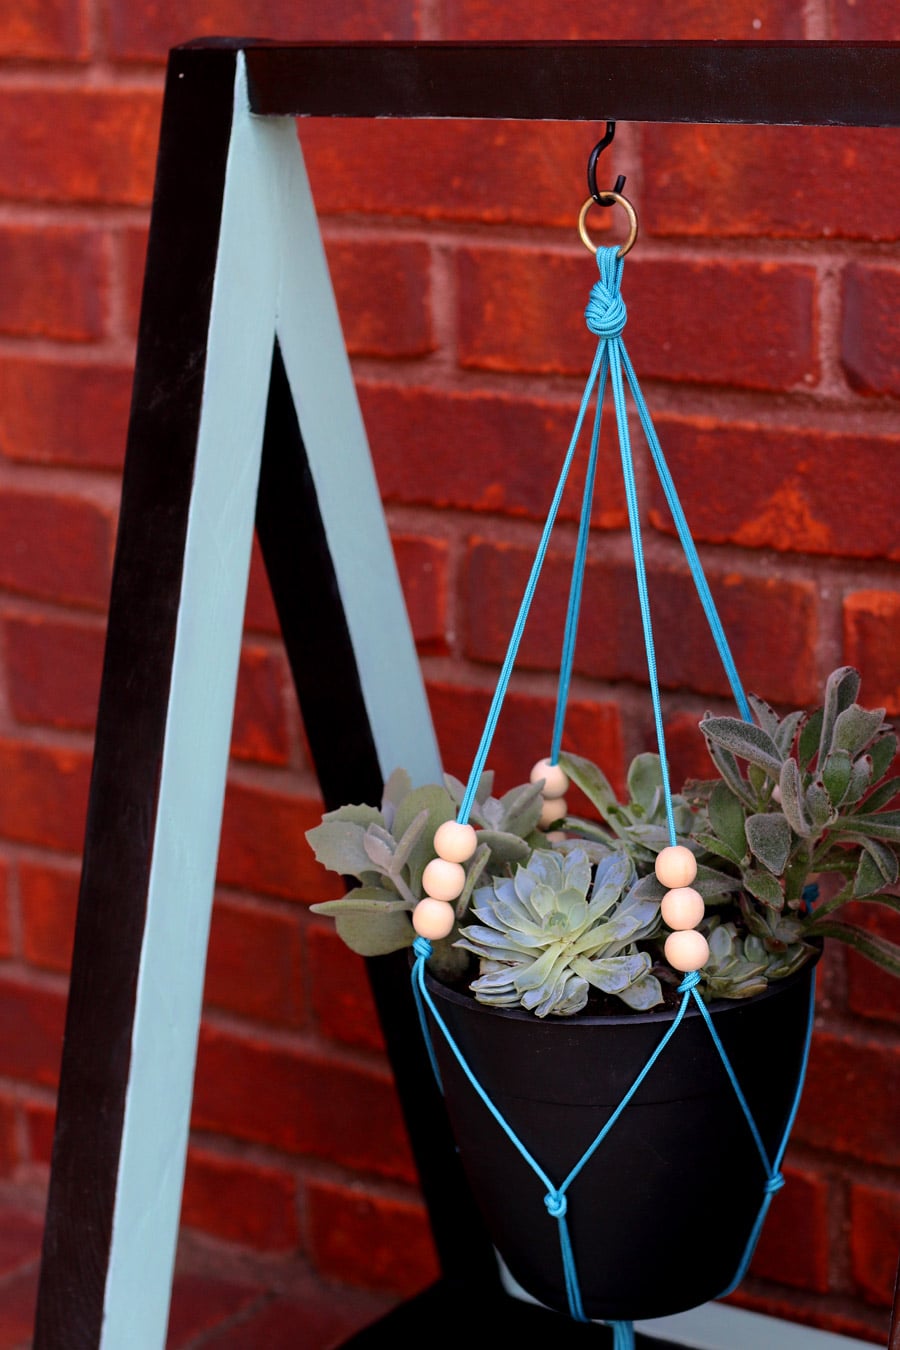 How to build a DIY hanging planter